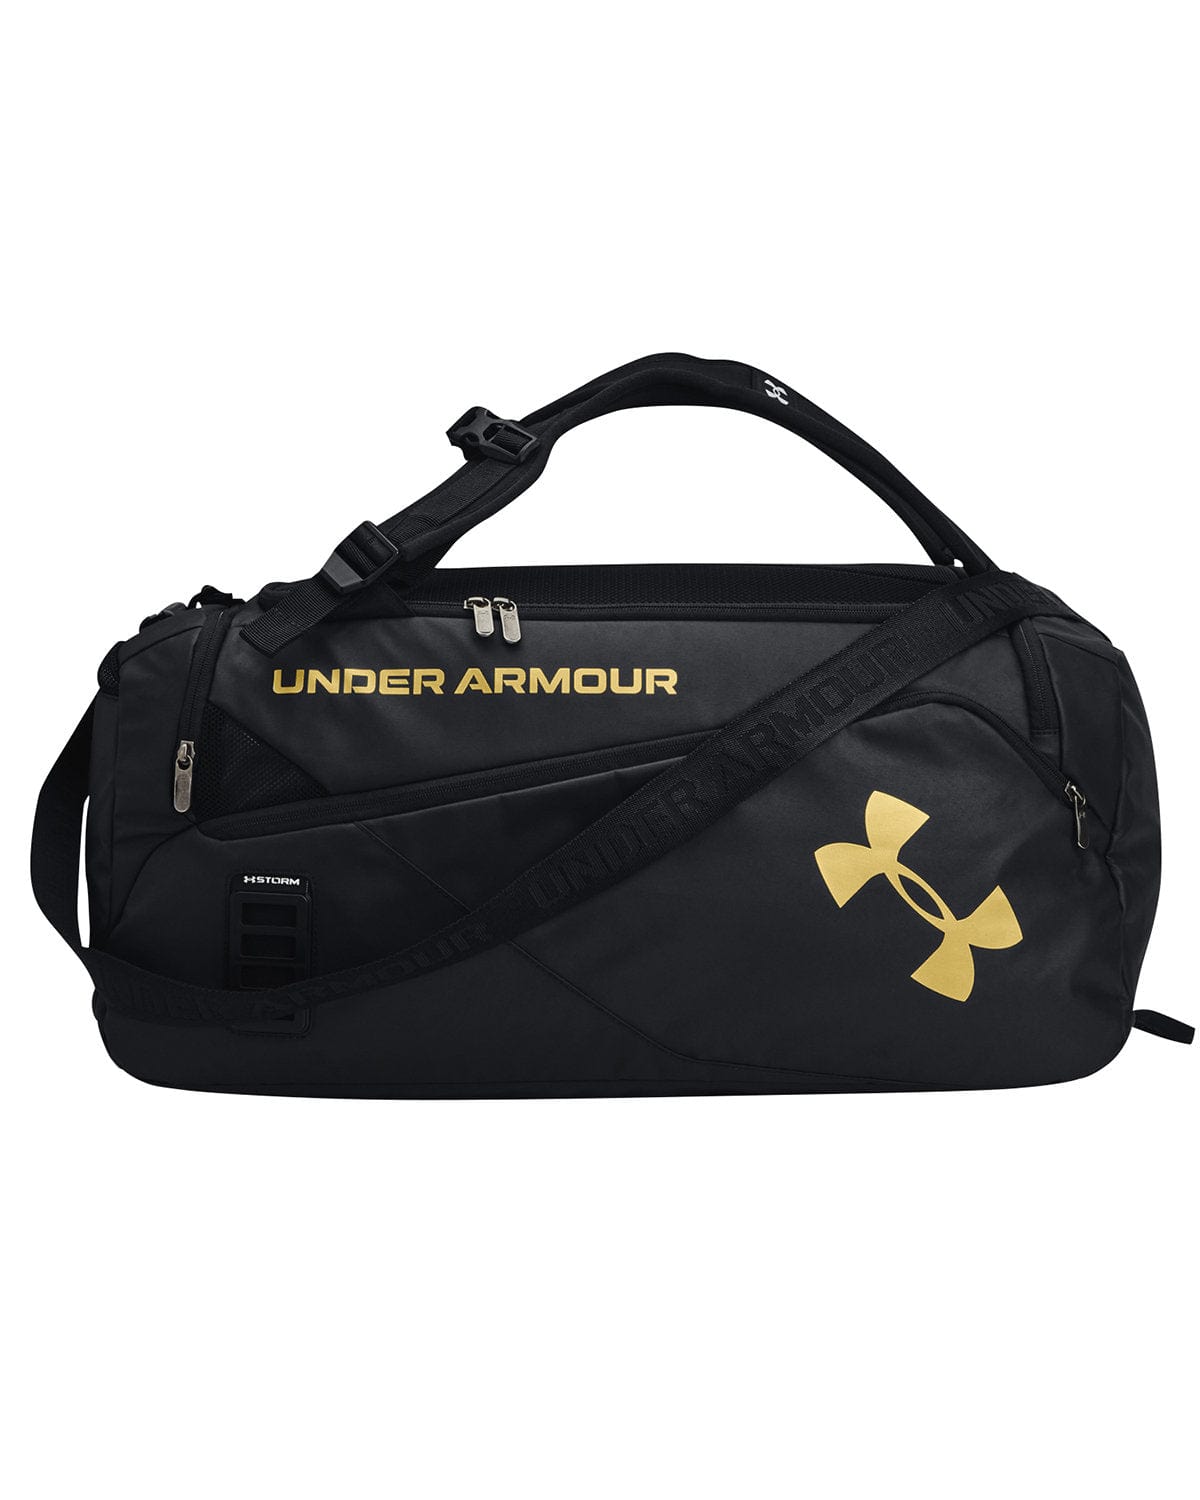 Under Armour Bags One Size / Black/Metallic Gold Under Armour - Contain Small Duffel